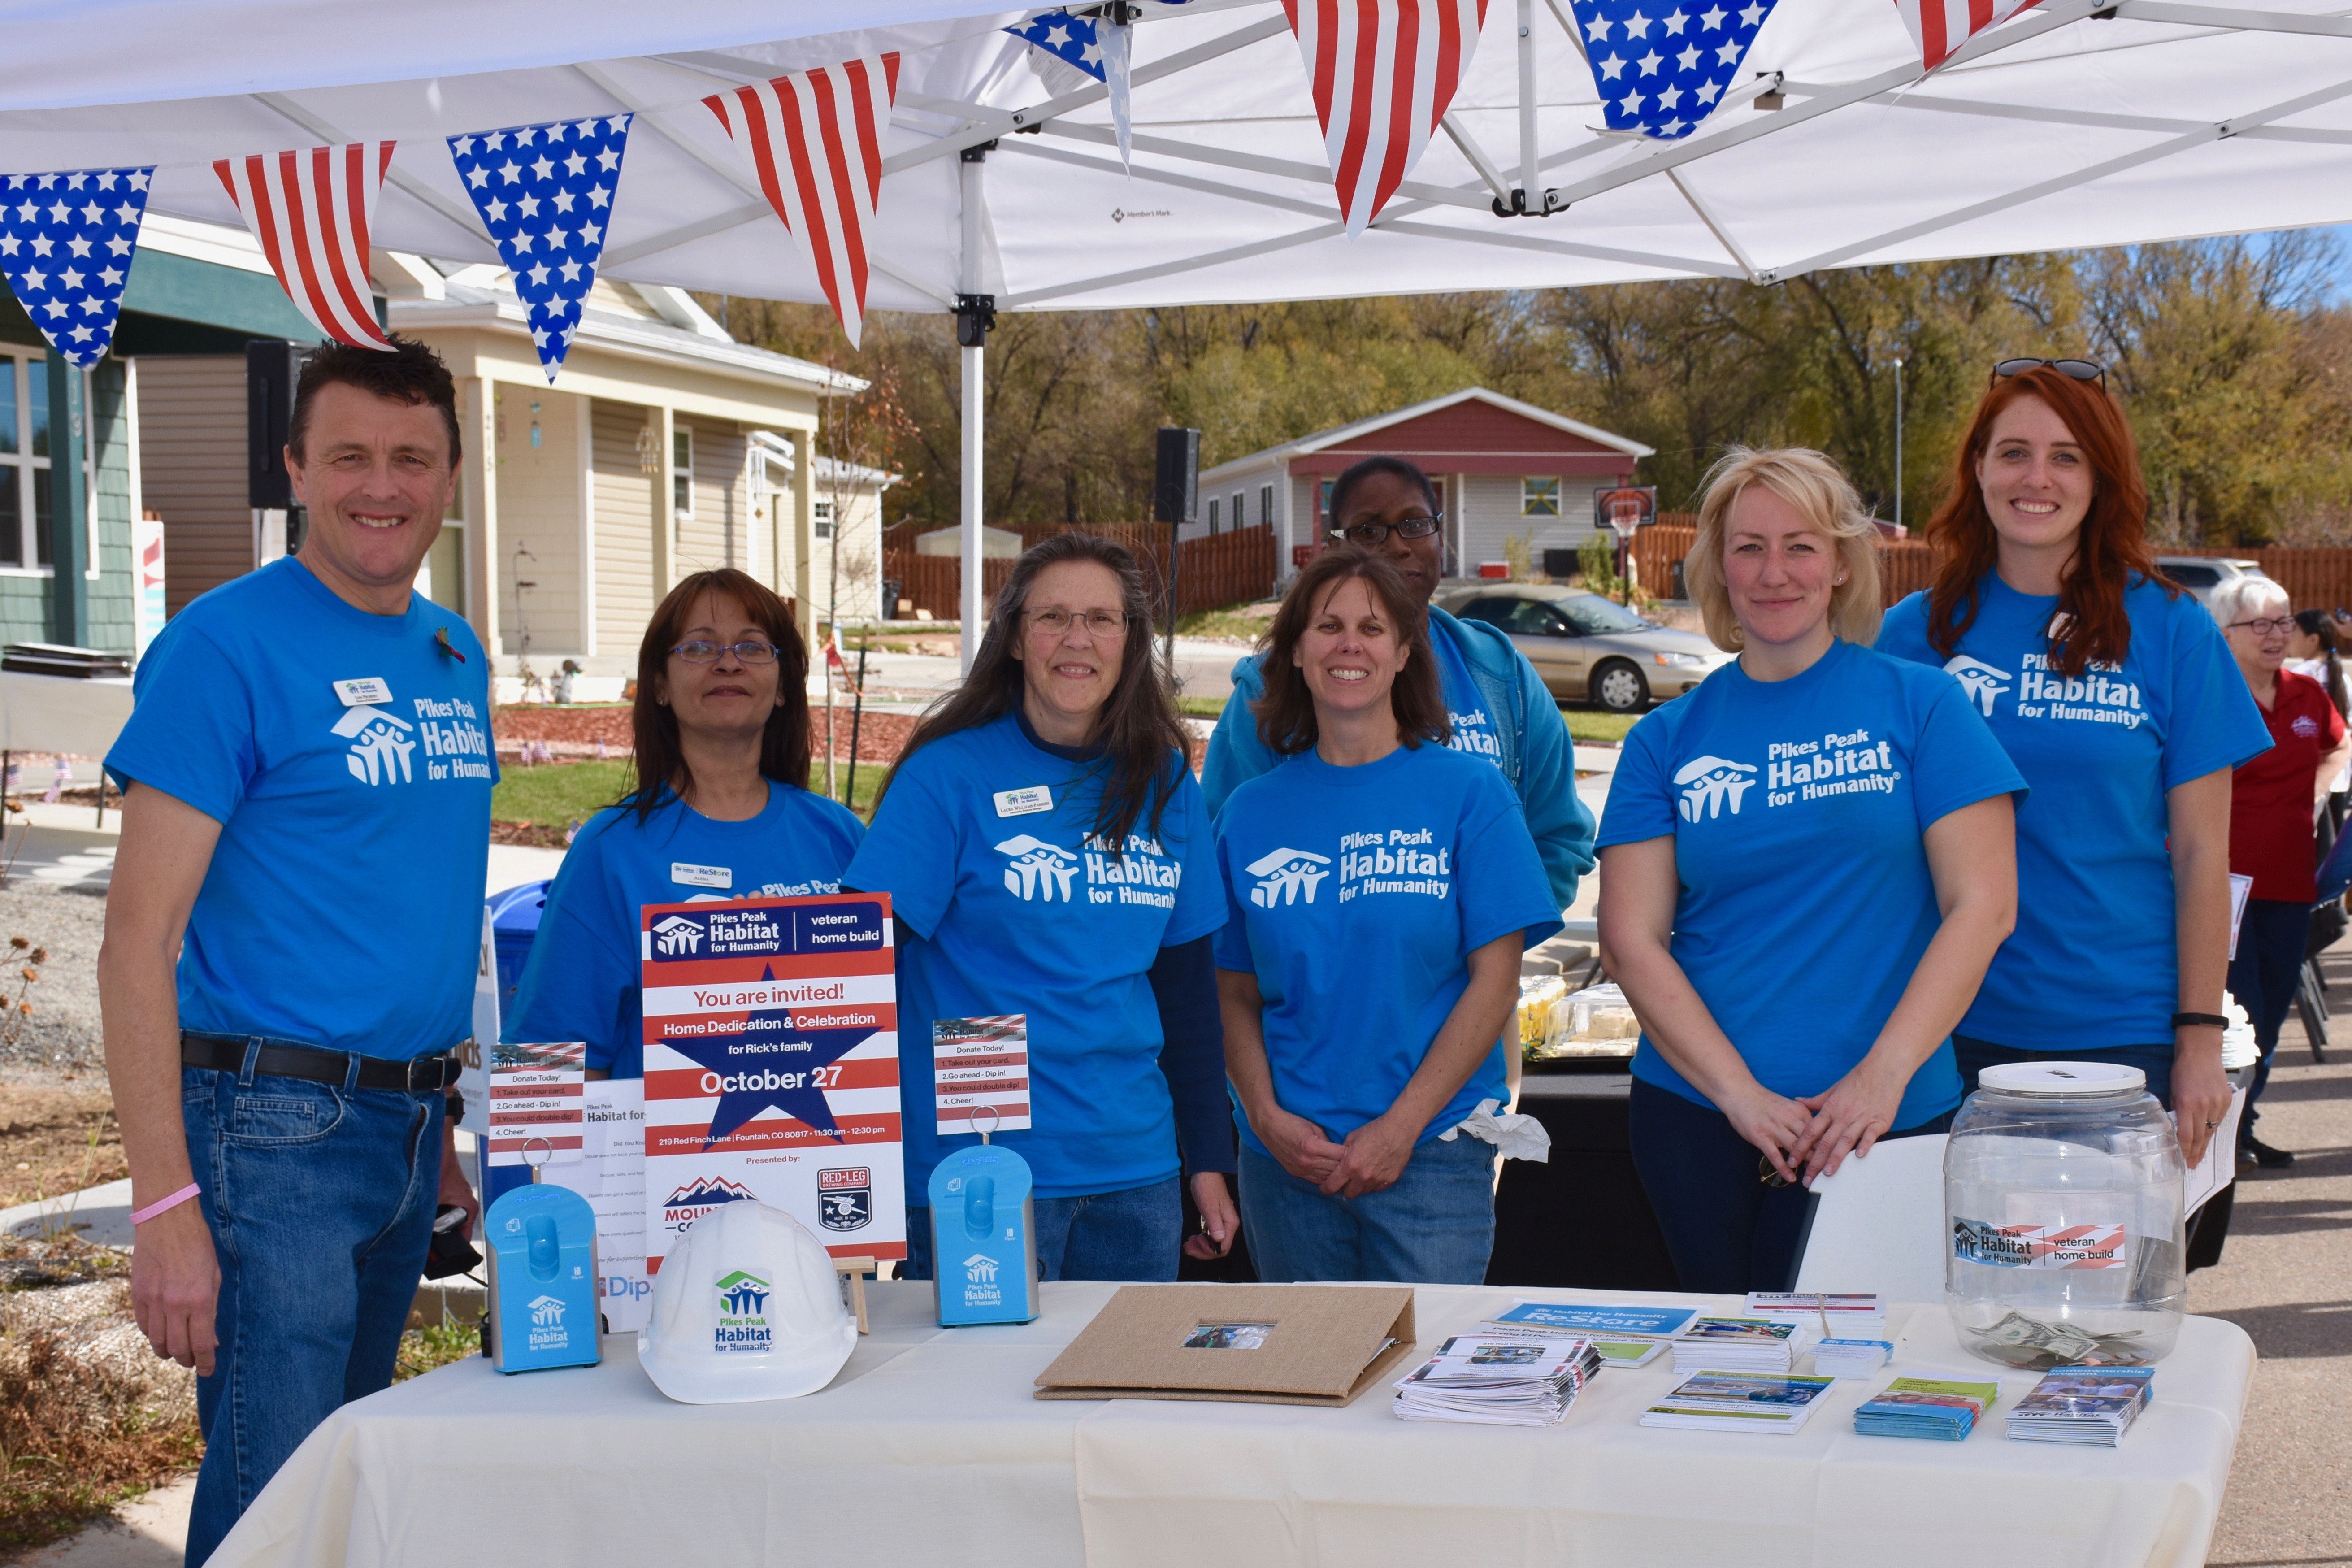 The PPHFH staff at our Veteran Home Dedication.